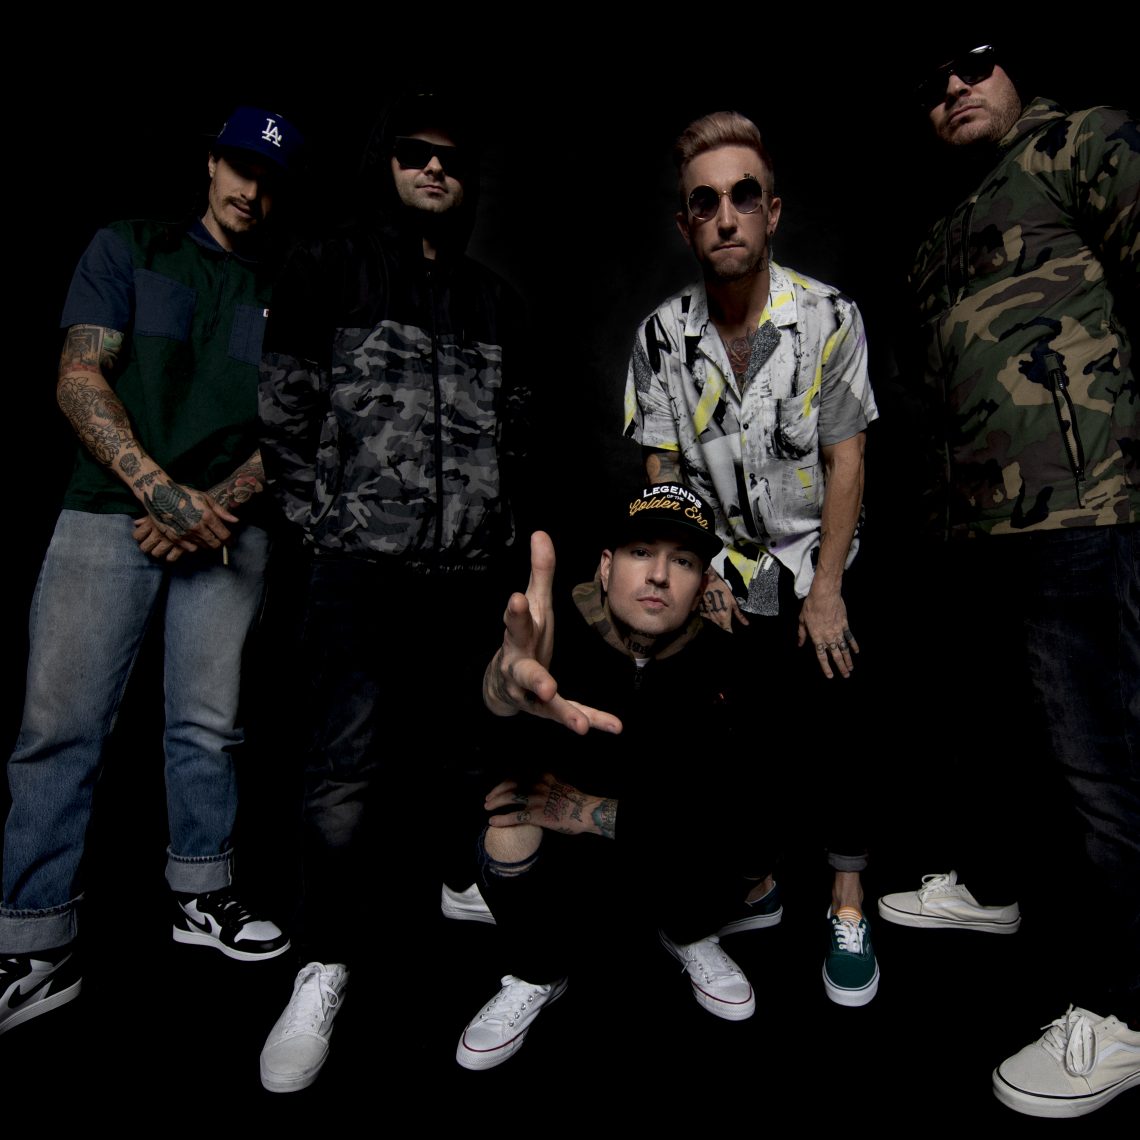 HOLLYWOOD UNDEAD Release Official Video for “Idol” ft. TECH N9NE